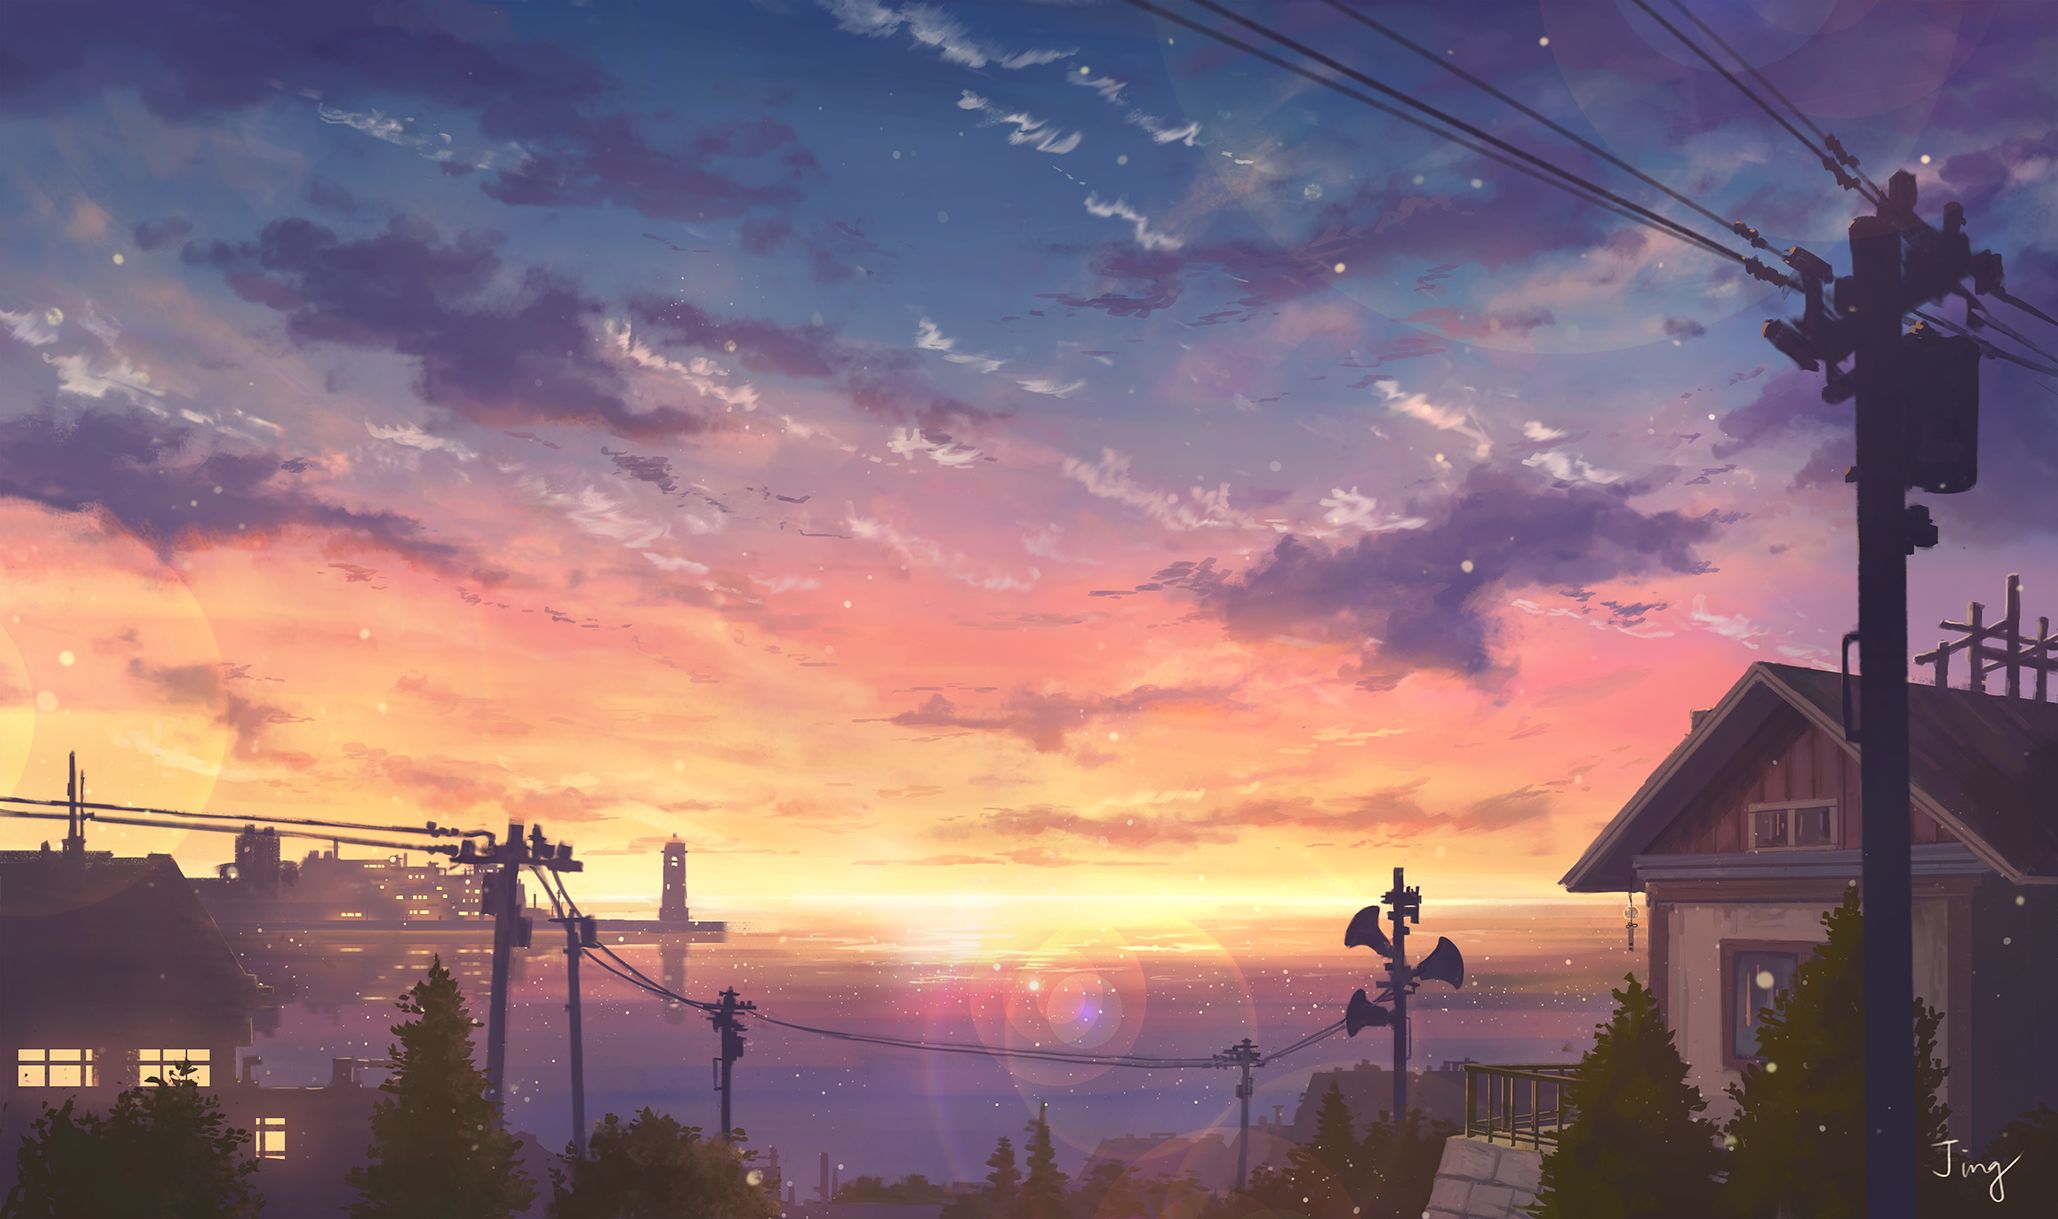 Download wallpaper 840x1336 original sunset landscape anime girl iphone  5 iphone 5s iphone 5c ipod touch 840x1336 hd background 26323